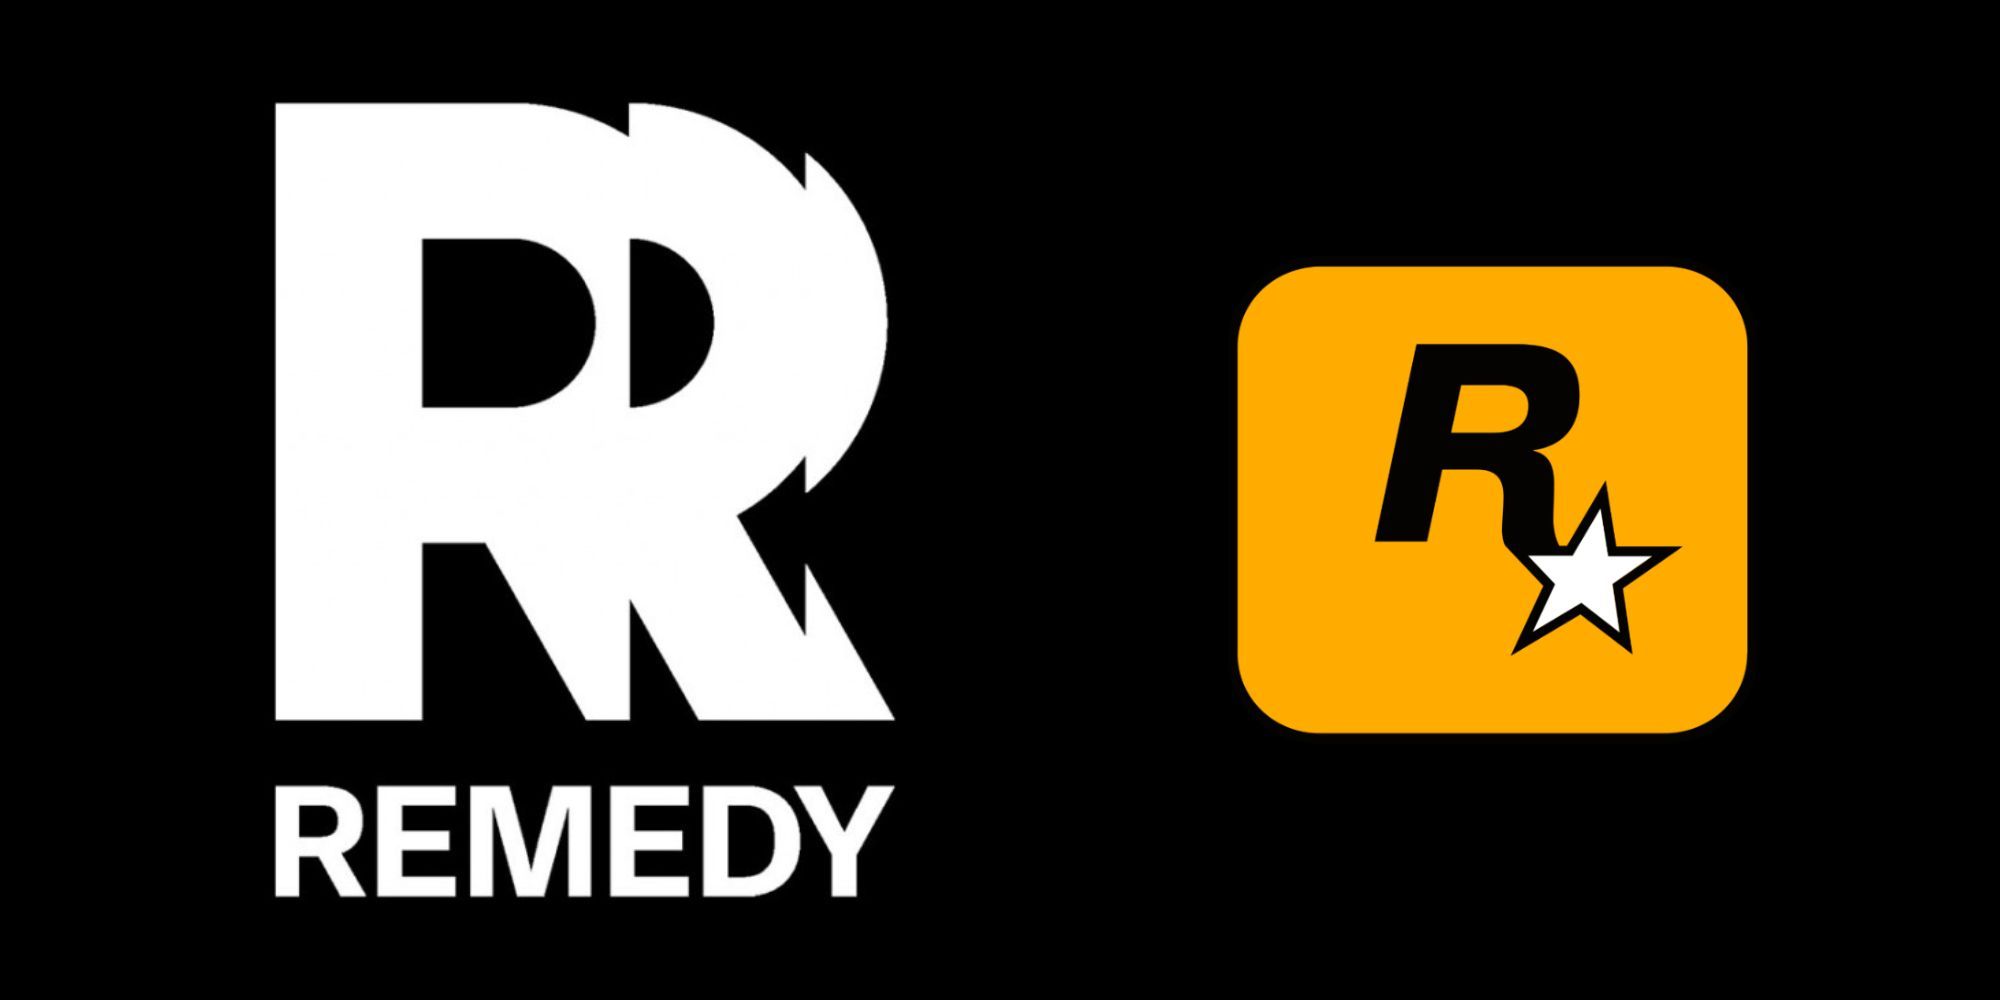 Left: the logo for Remedy Entertainment. It is a white R, blurred to show multiple Rs. Right: Rockstar Games' logo. This is a black stylised R, curved, and on top of a star icon. The background is yellow. 